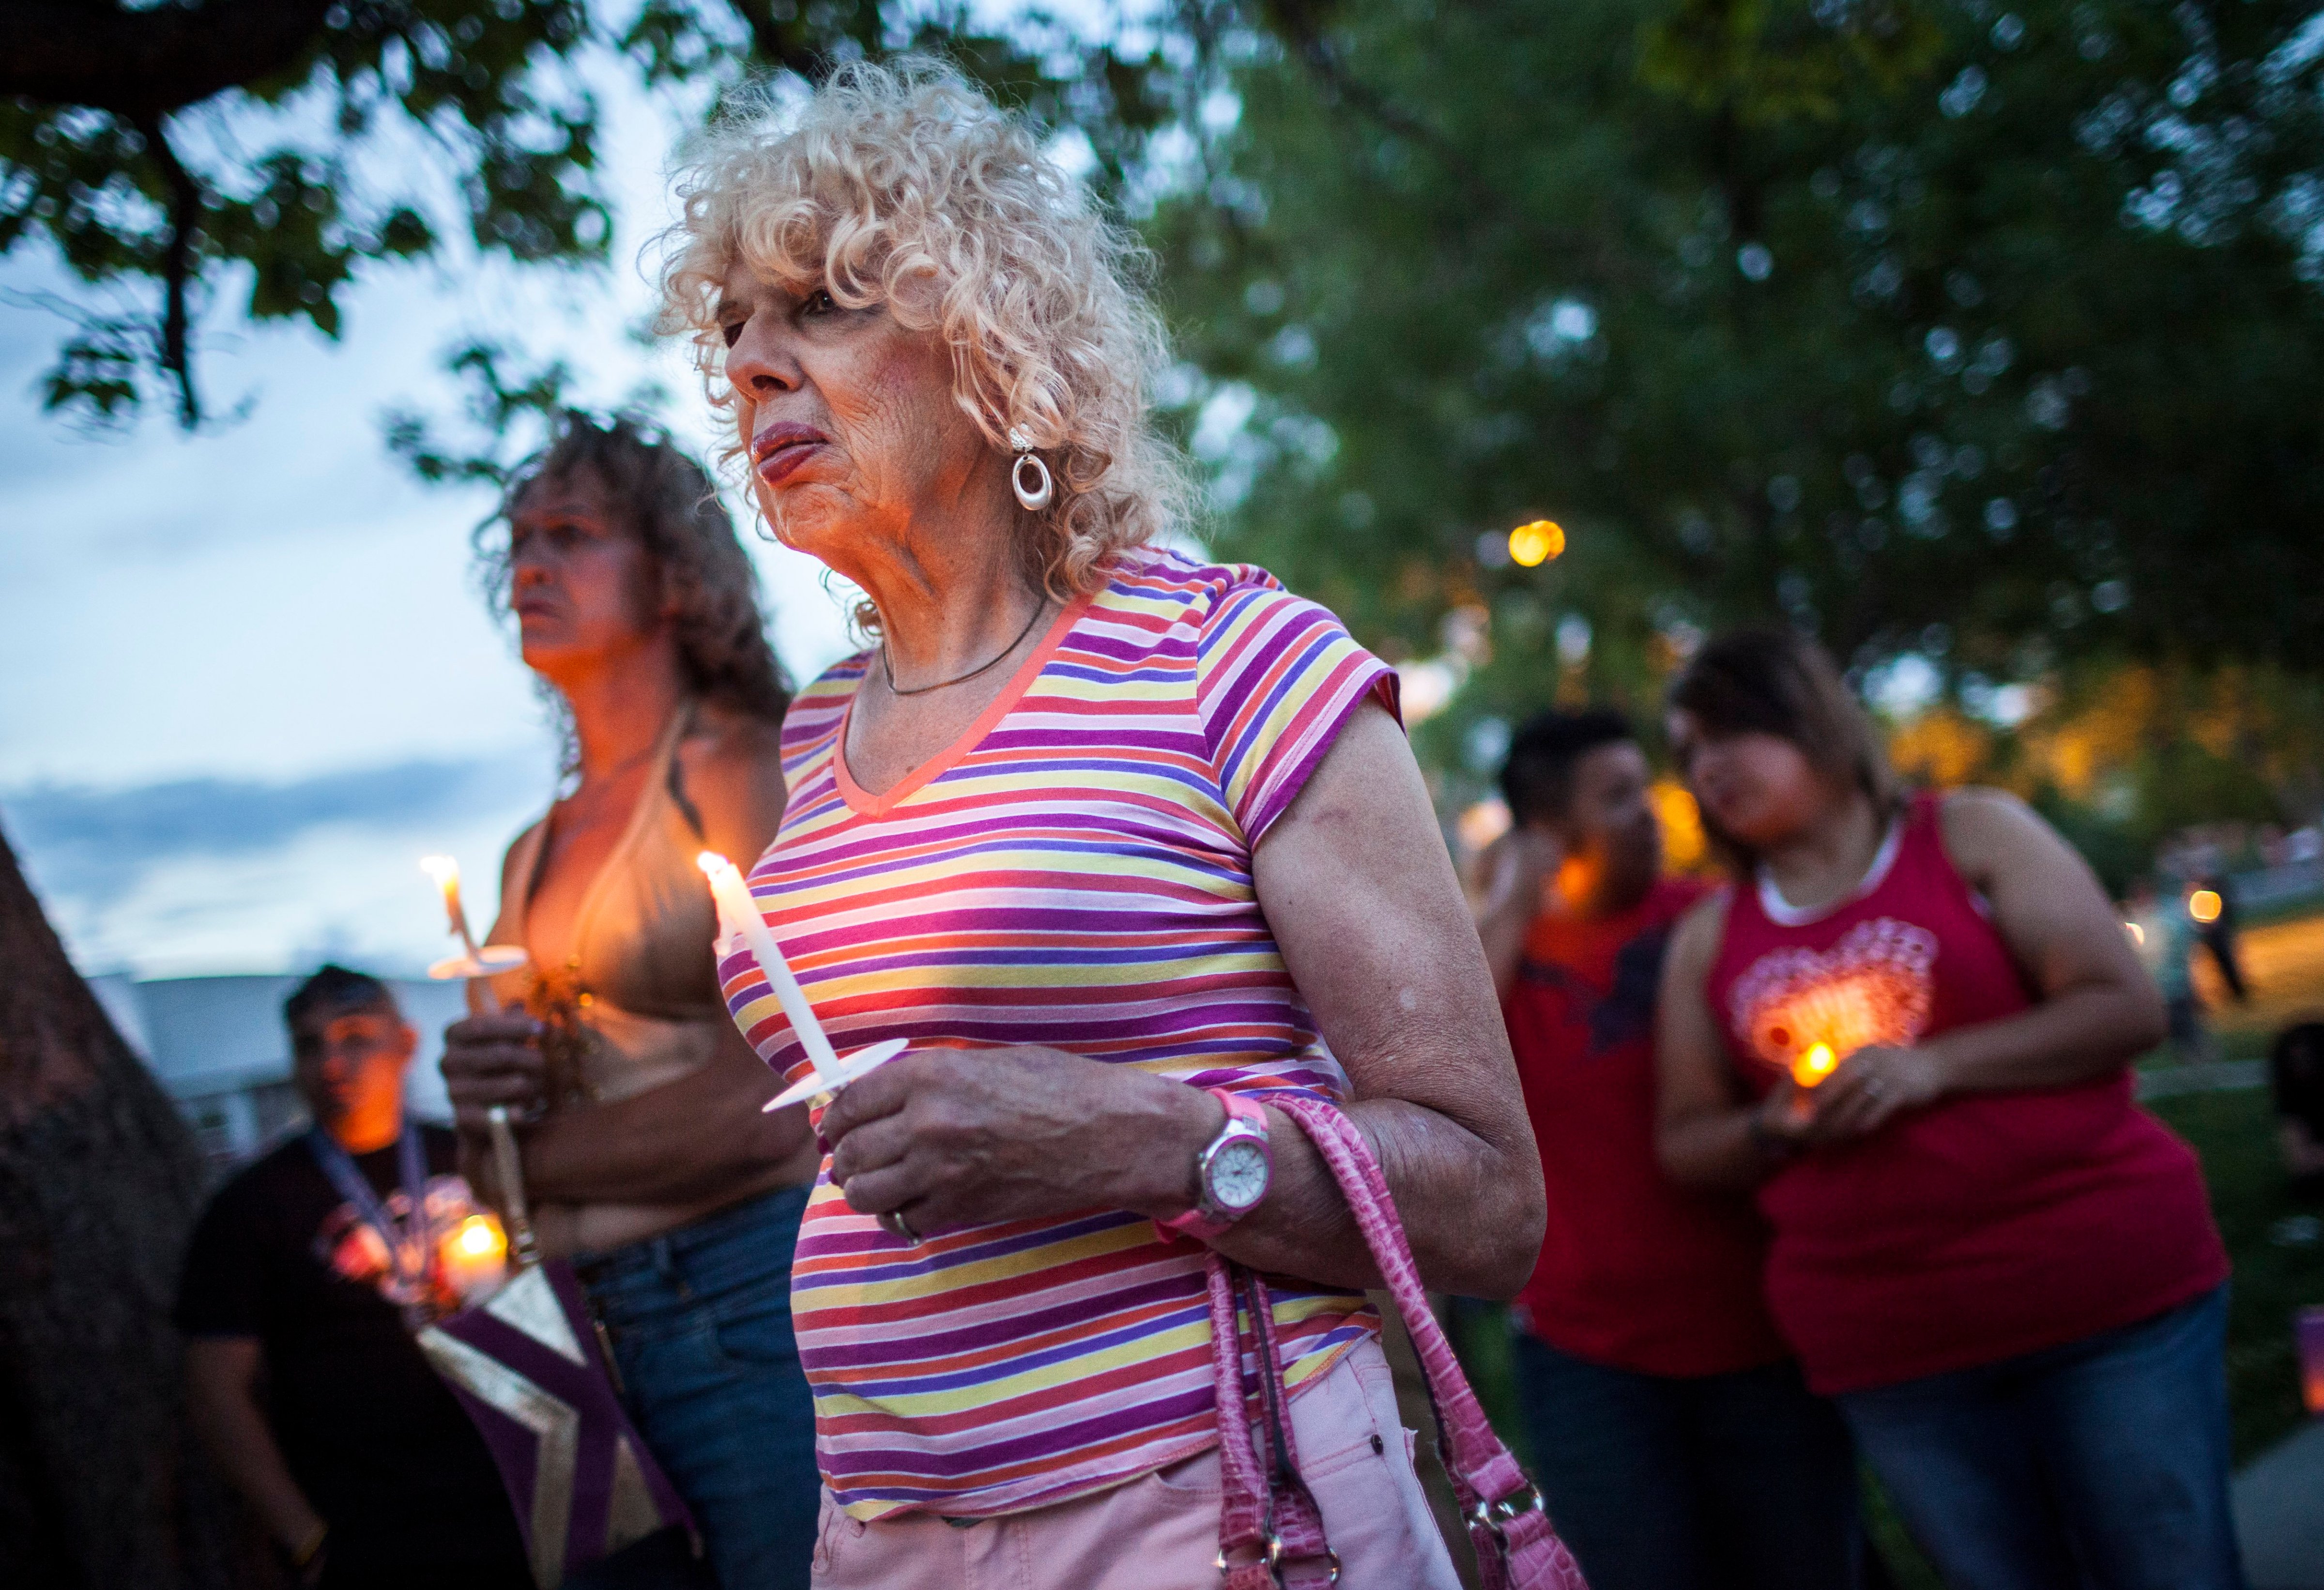 Denee Mallon, center, joins a candlelight vigil organized by Albuquerque Pride in Albuquerque, N.M on May 29, 2014. A U.S. Department of Health and Services review board ruled on May 30, in favor of Mallon, a 74-year-old Army veteran, whose request to have Medicare pay for her genital reconstruction was denied two years ago. (Craig Fritz—AP)